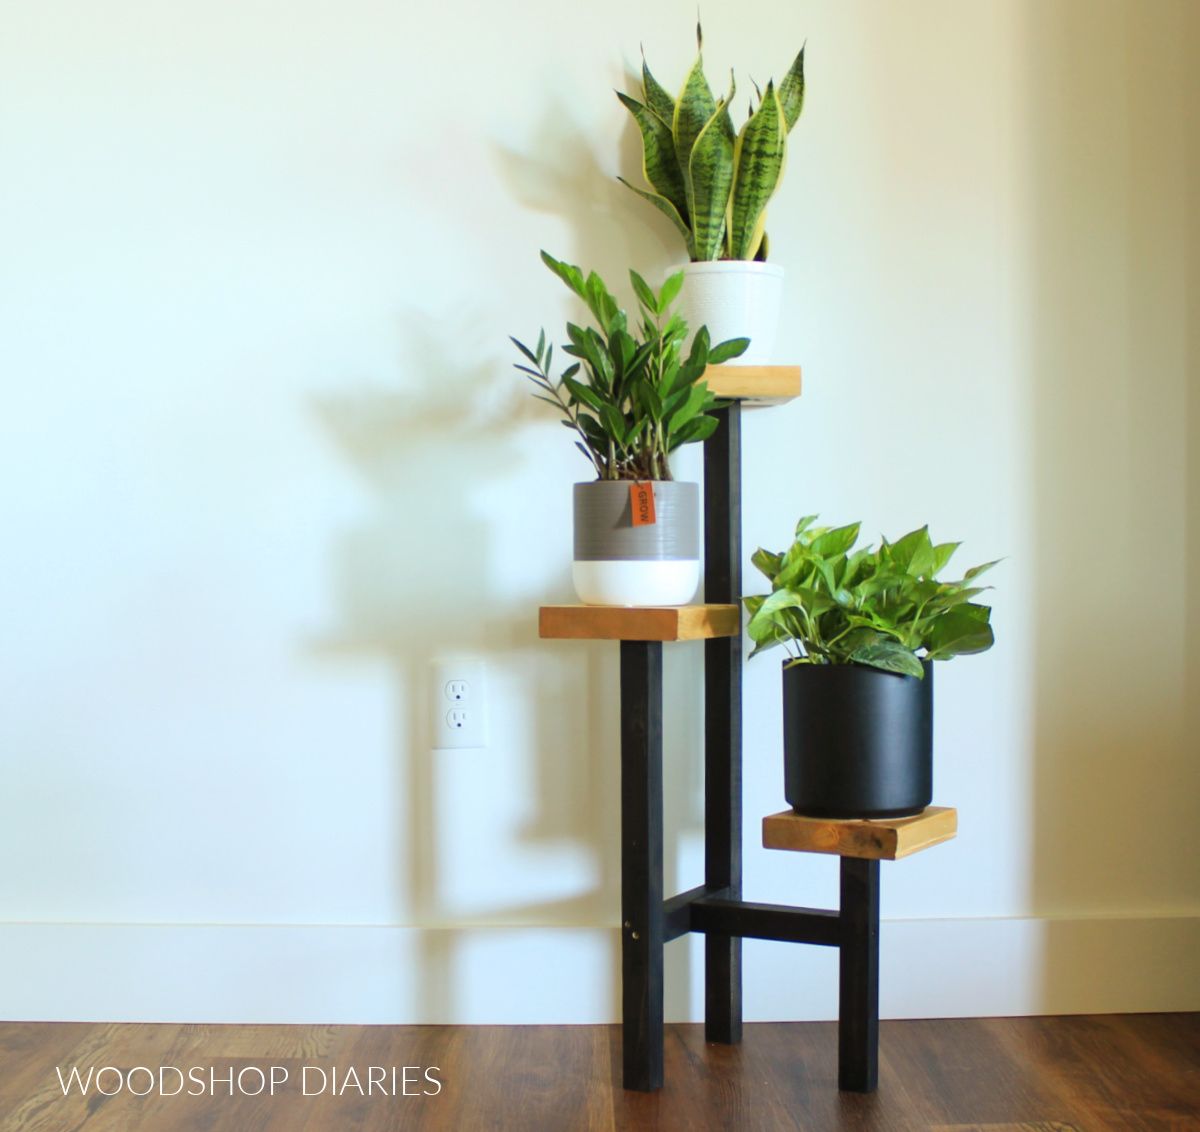 Diy Tiered Plant Stand | From Scrap Wood! Inside Three Tier Plant Stands (View 12 of 15)